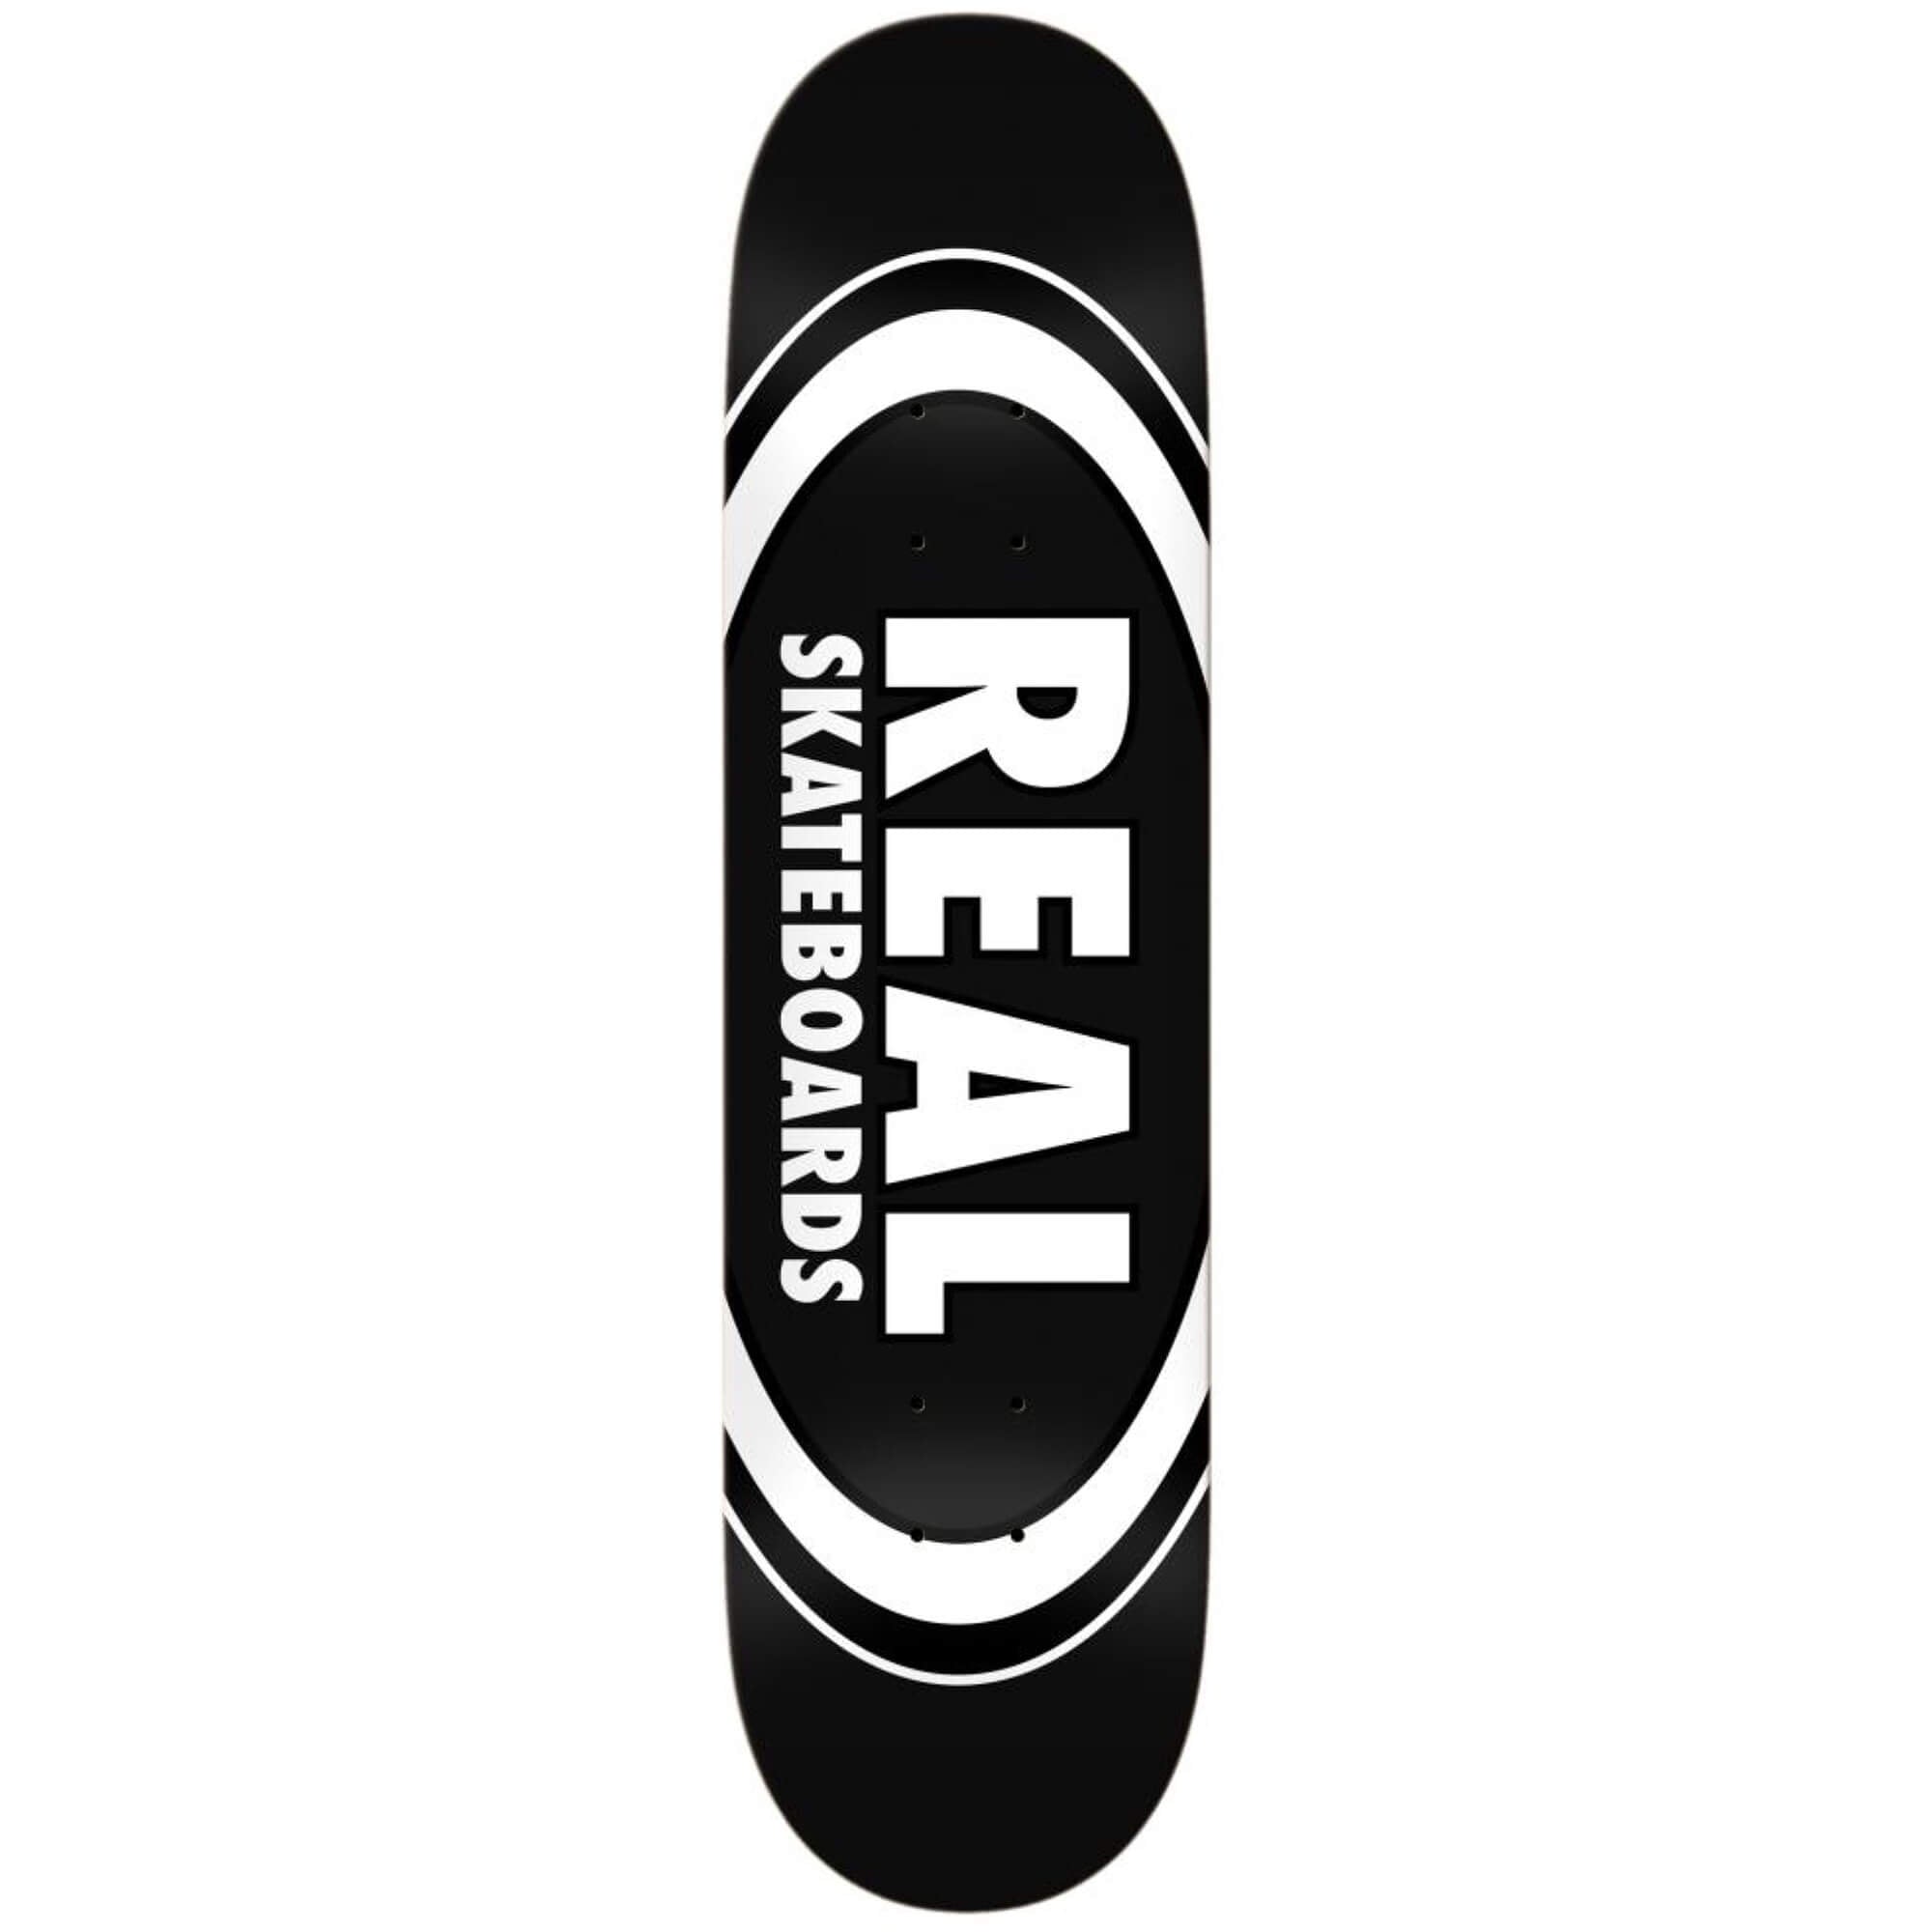 Real Skateboards Team Classic Oval Deck Black 8.25"